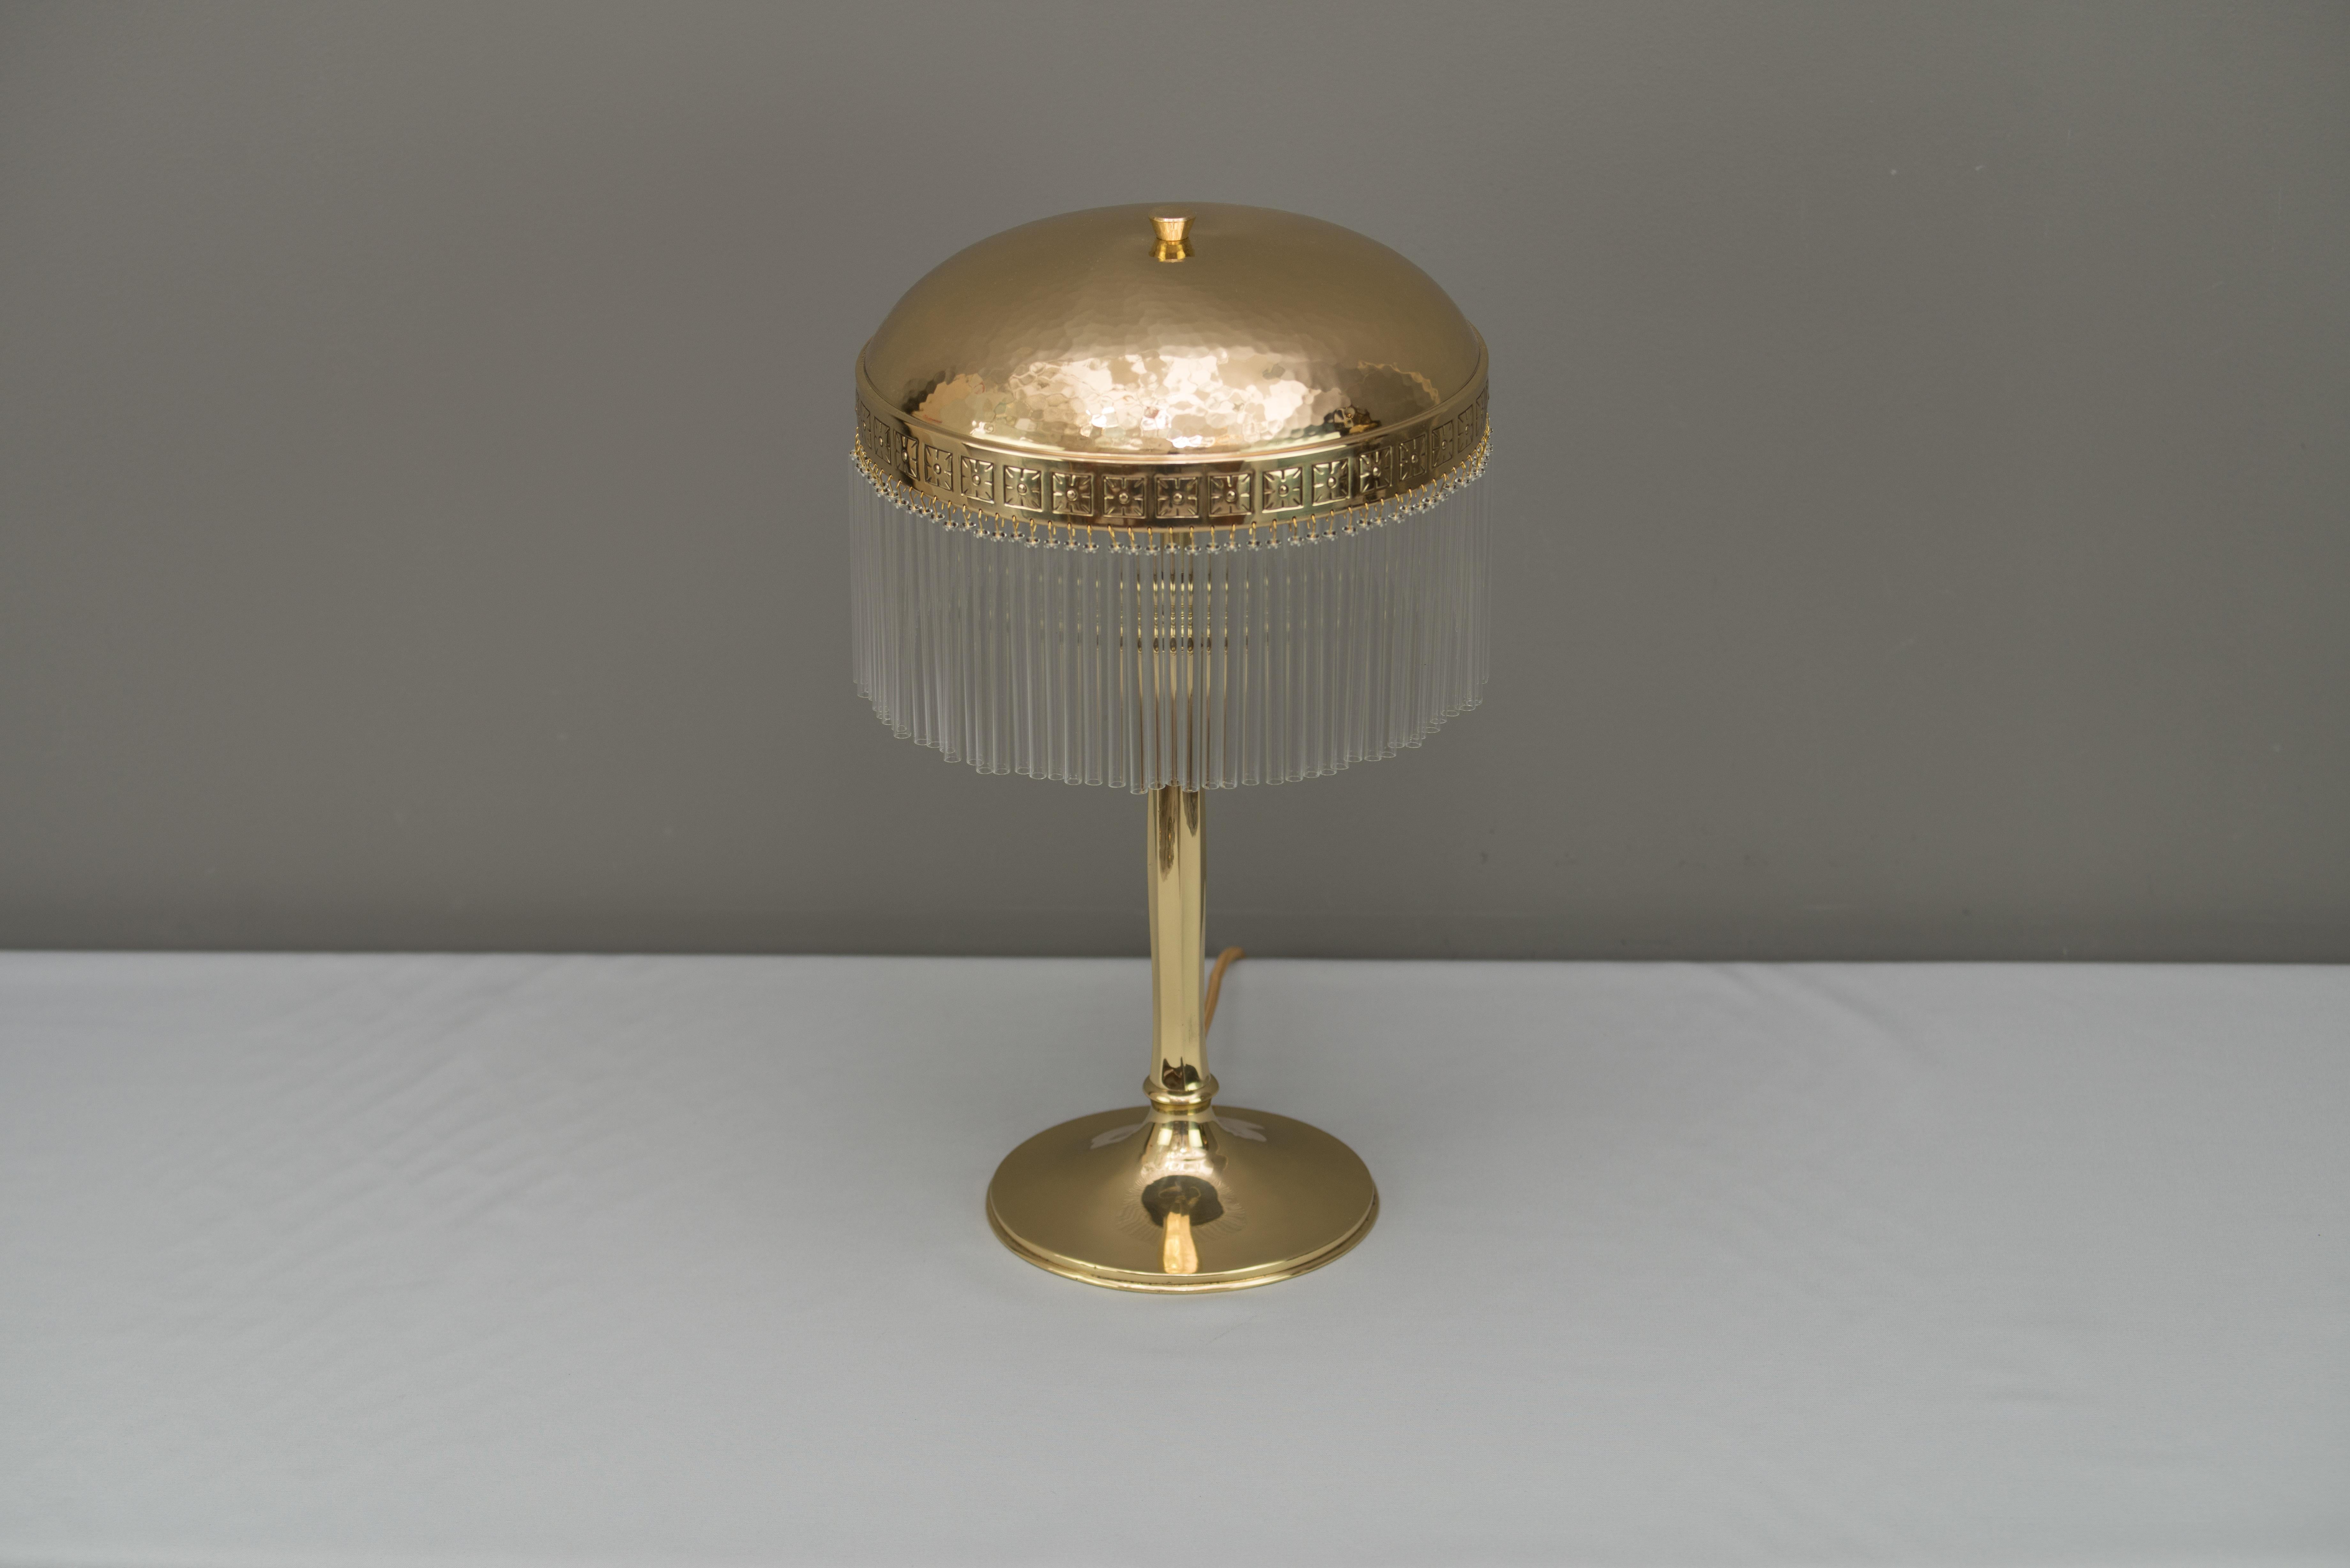 Hammered Jugendstil table lamp with glass sticks, circa 1910s
Polished and stove enameled
Glass sticks are replaced (new)
2 Bulbs.